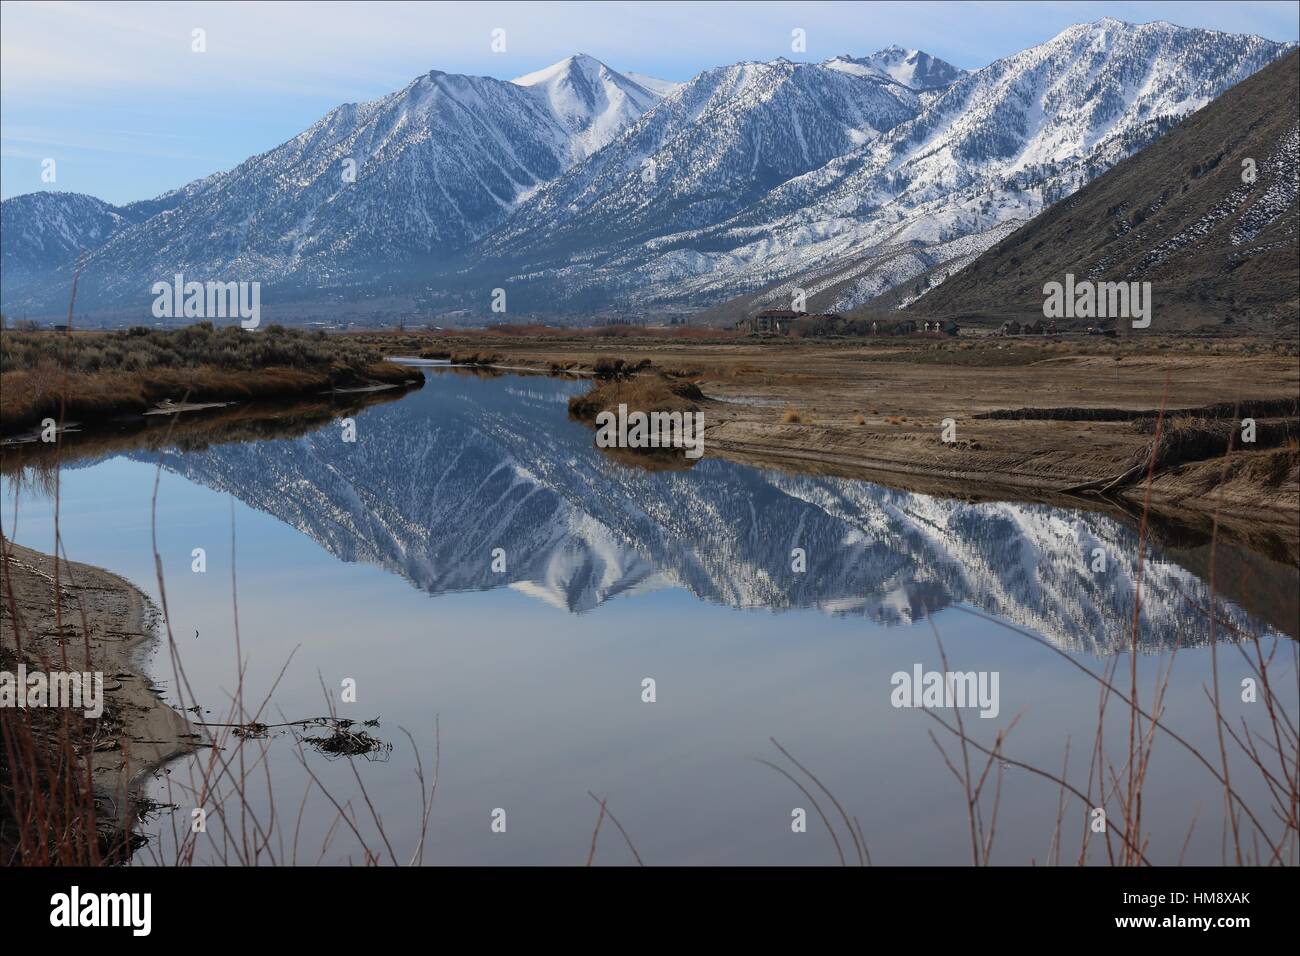 The eastern side of the Sierra Nevada mountains reflect in a pond located in the Carson Valley, near Genoa, Nevada. Stock Photo